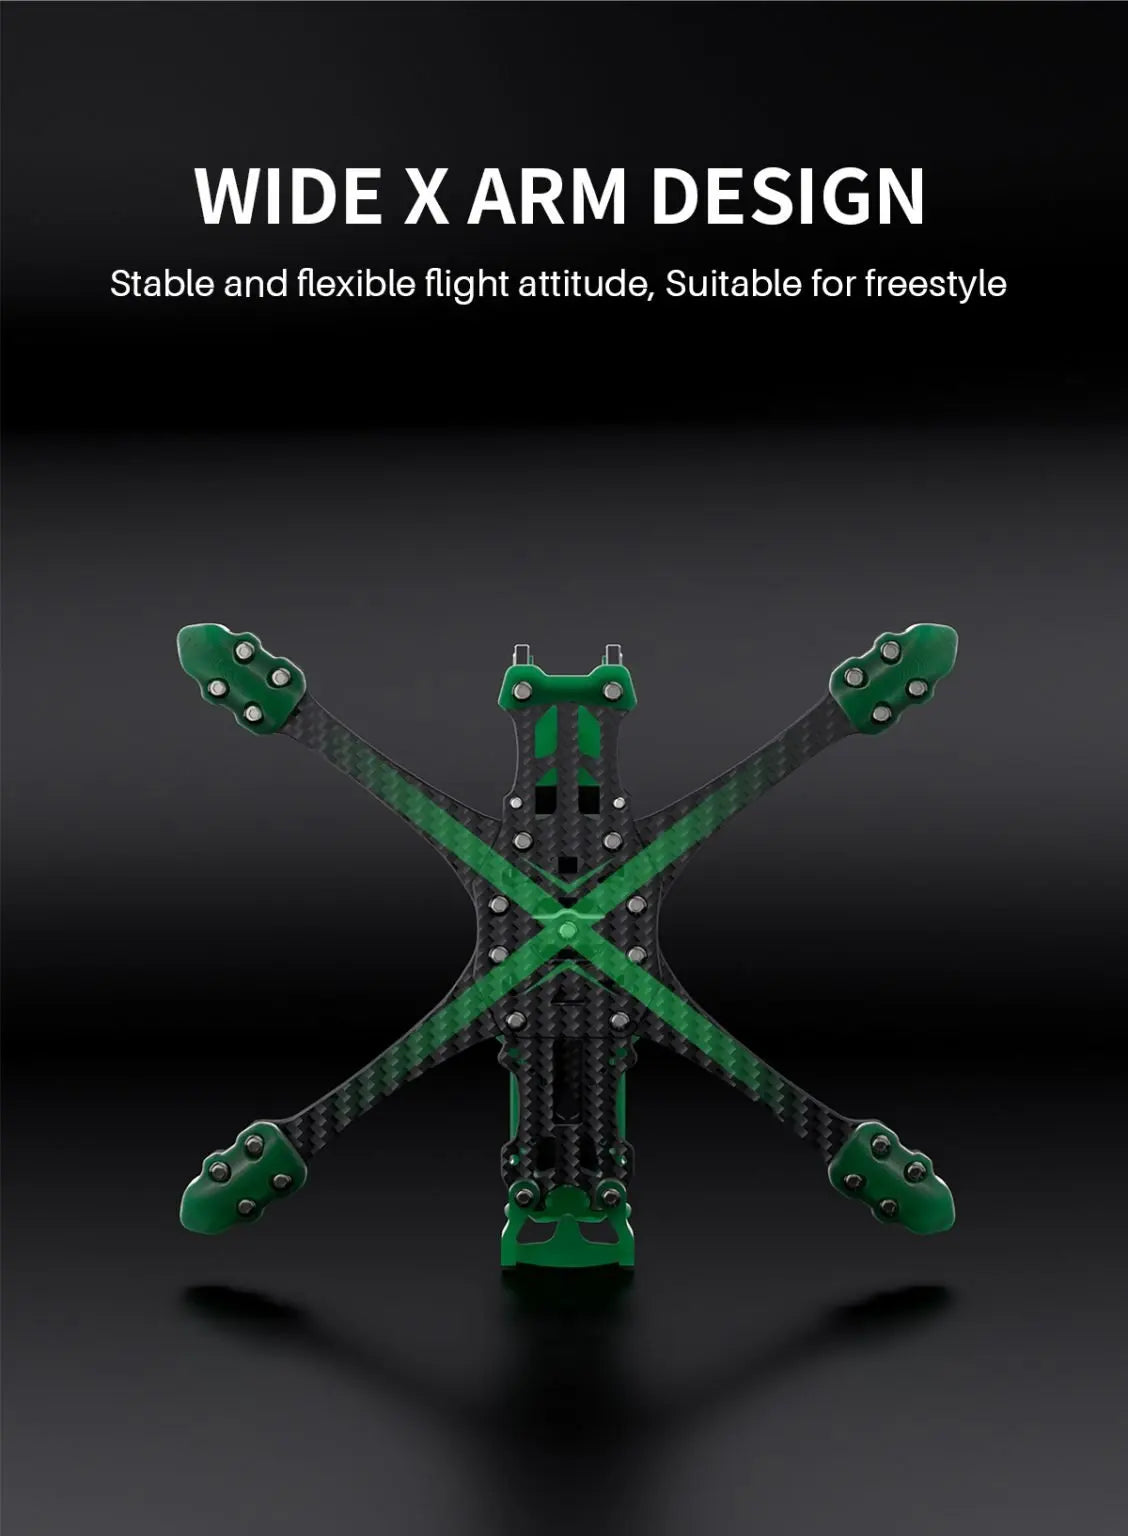 GEP-MK5D O3 MK5X to MK5D Conve DeadCat Frame, WIDE XARM DESIGN Stable and flexible flight attitude, Suitable for free